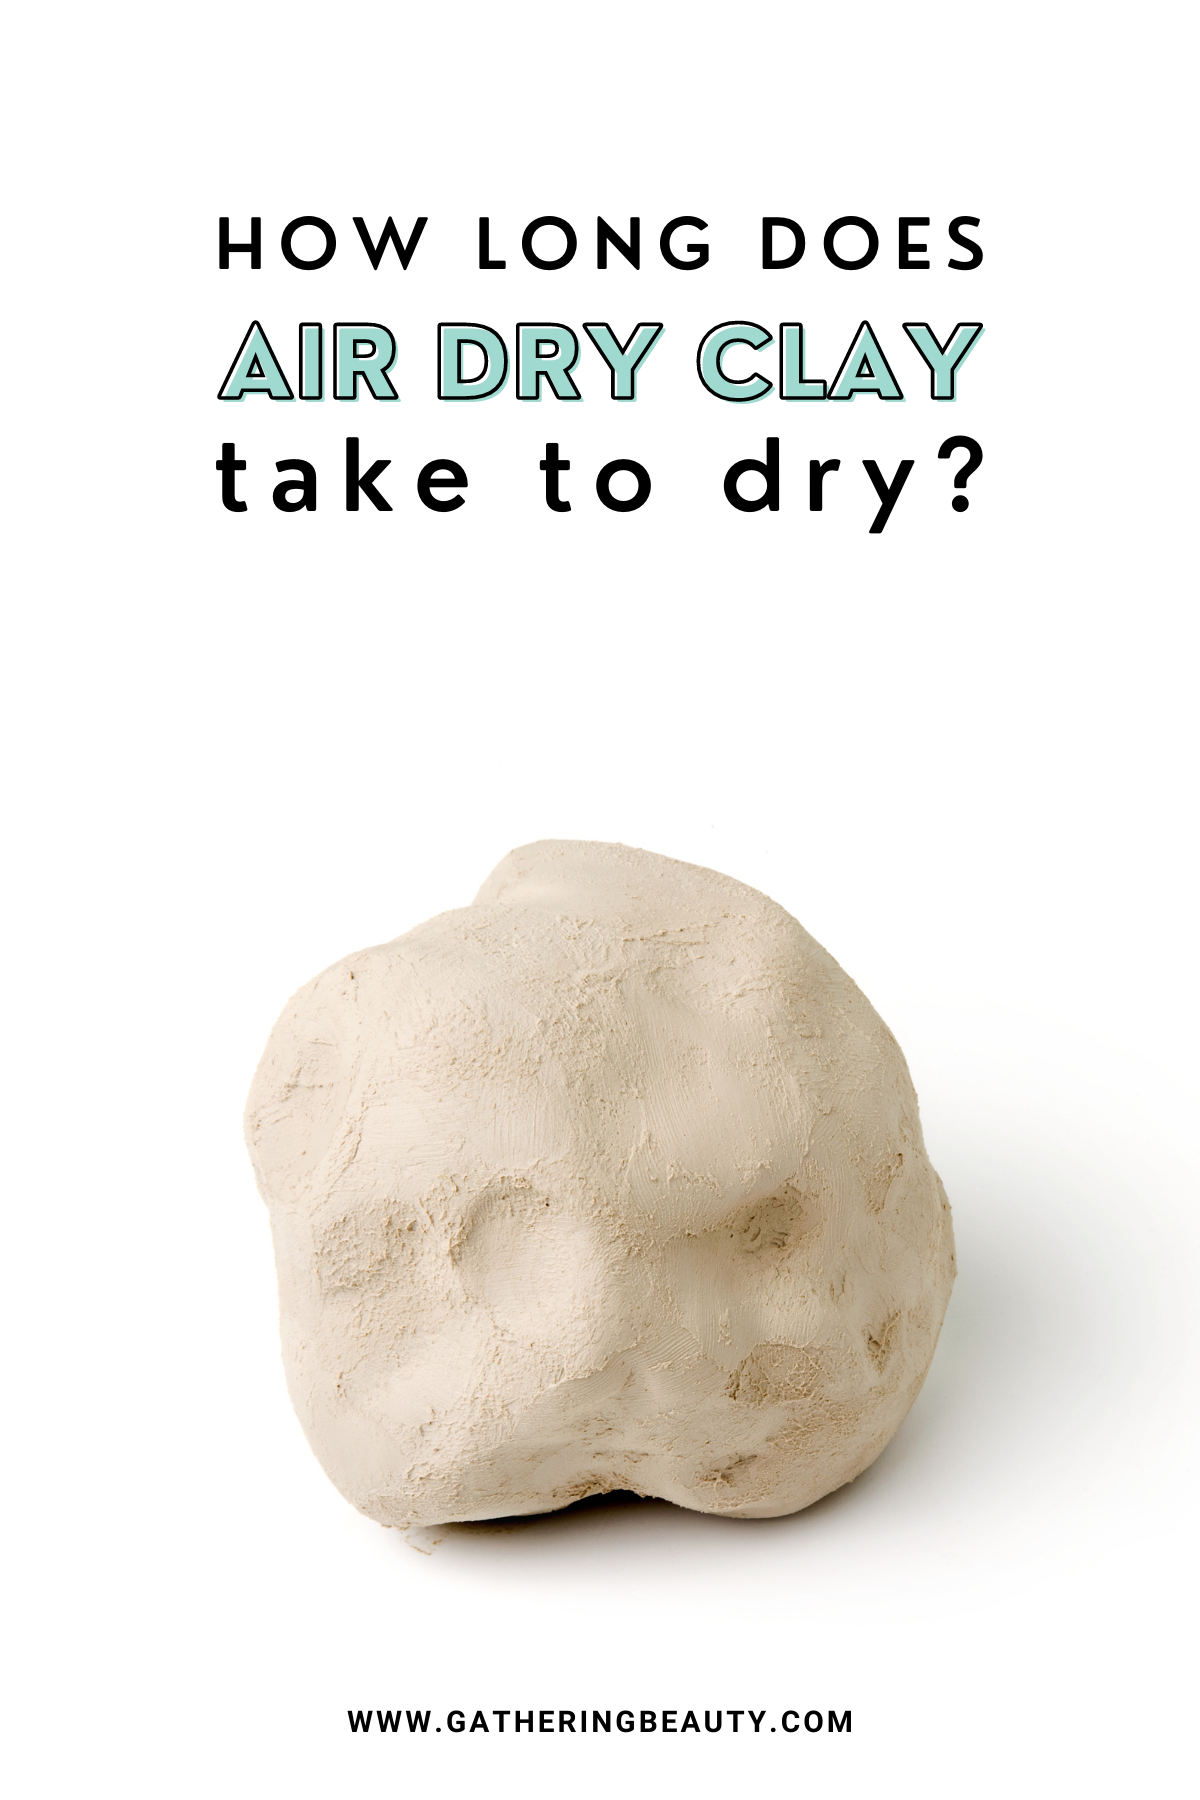 Can Crayola Air Dry Clay be baked in oven? Is crayola air dry clay